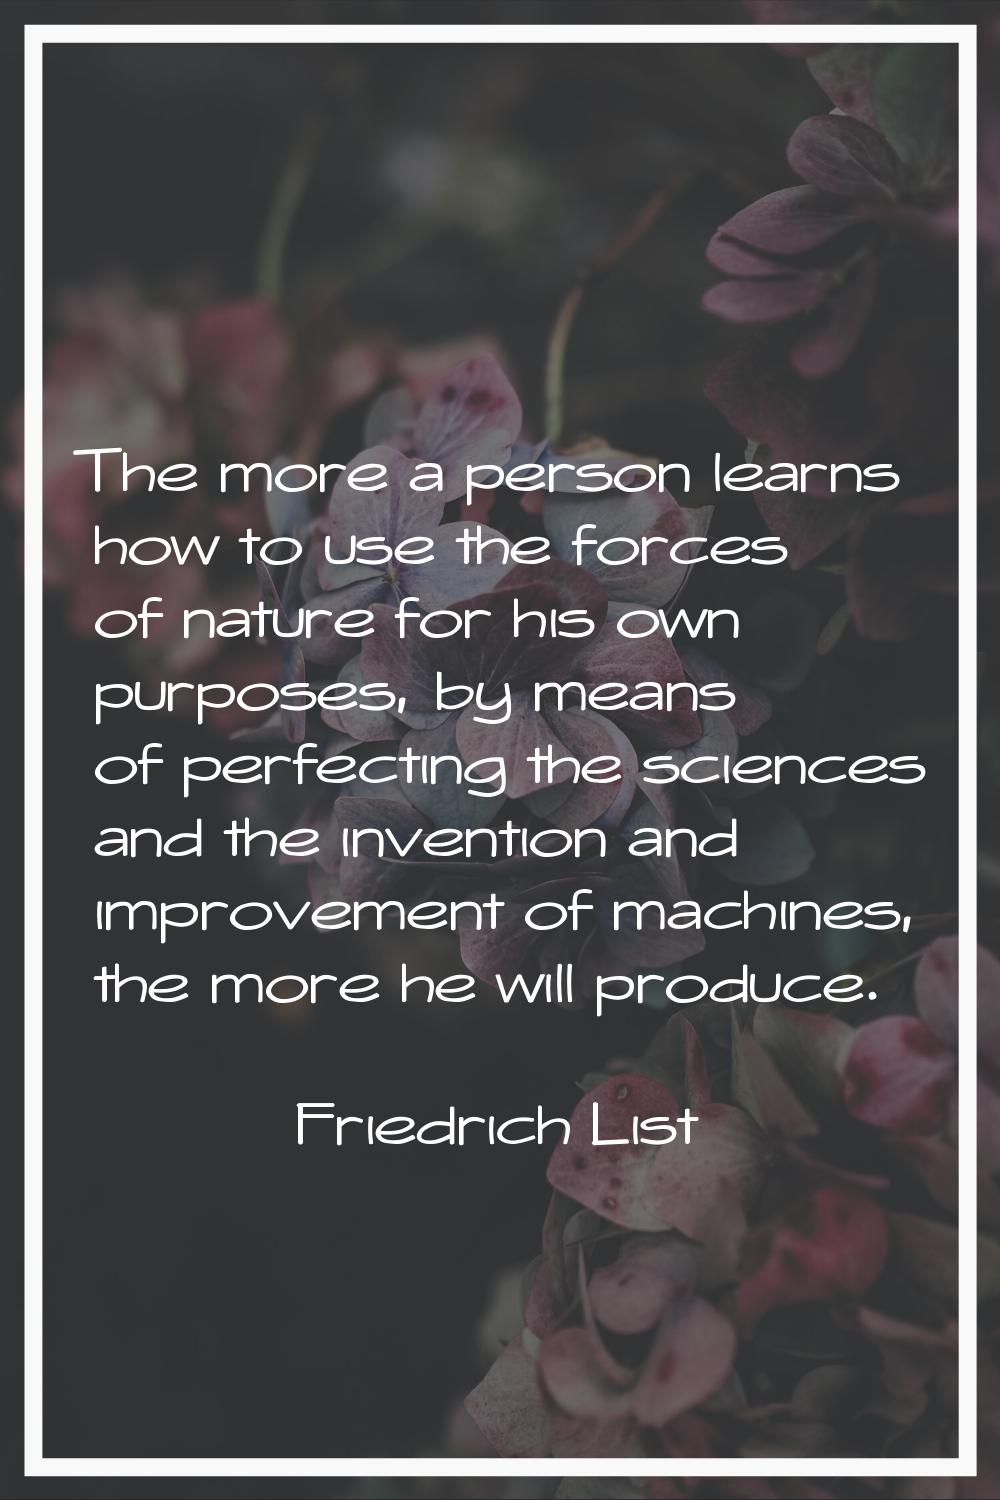 The more a person learns how to use the forces of nature for his own purposes, by means of perfecti